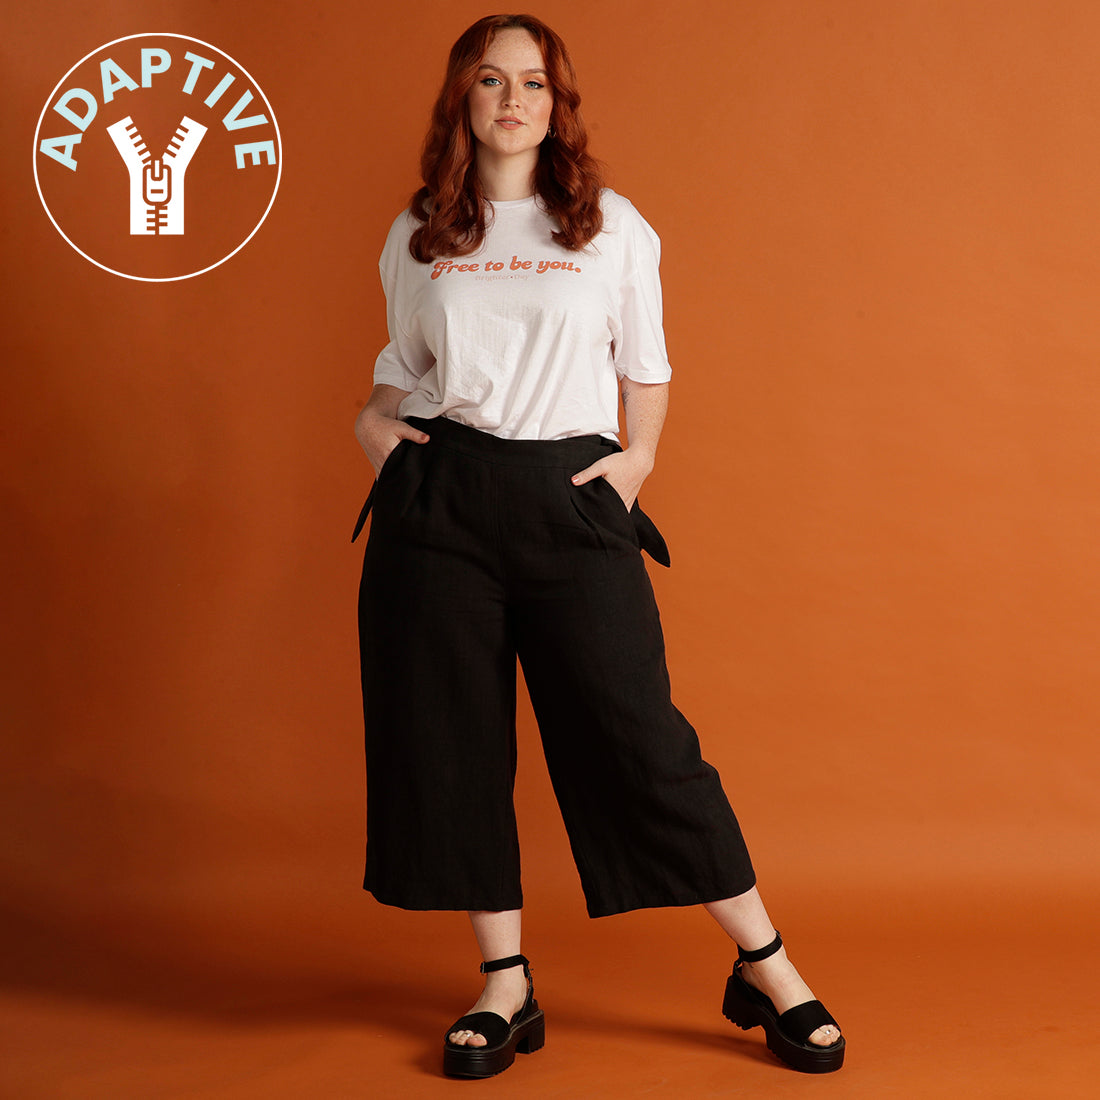 woman wearing black culottes and white tee standing with orange background